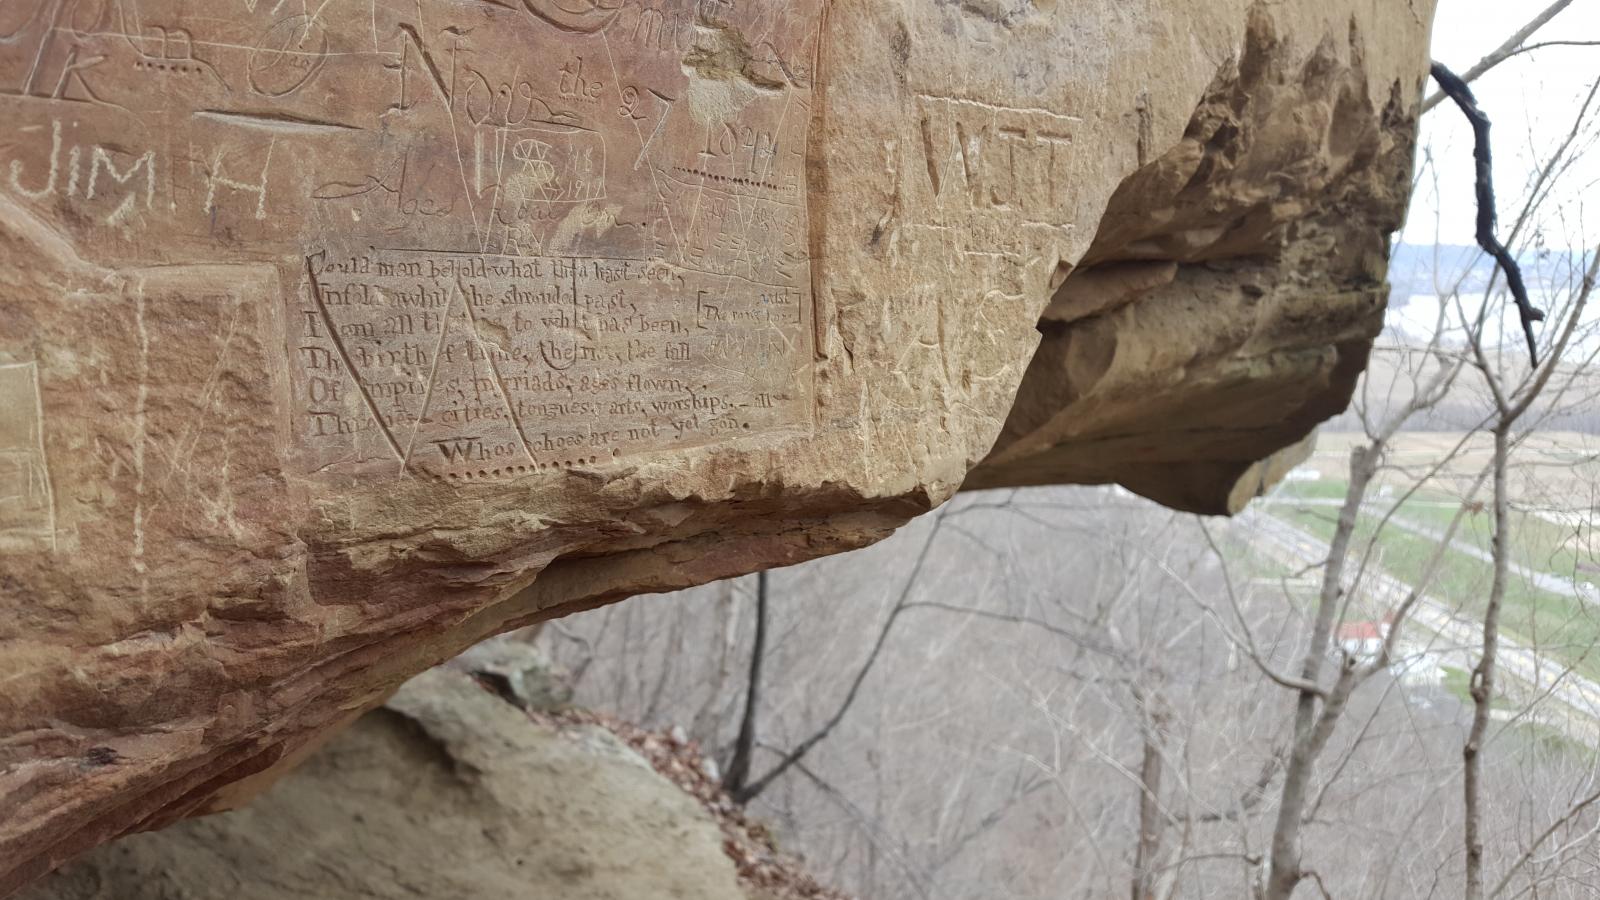 A verse of poetry dating to 1844 carved into a cliff at Raven Rock State Nature Preserve.